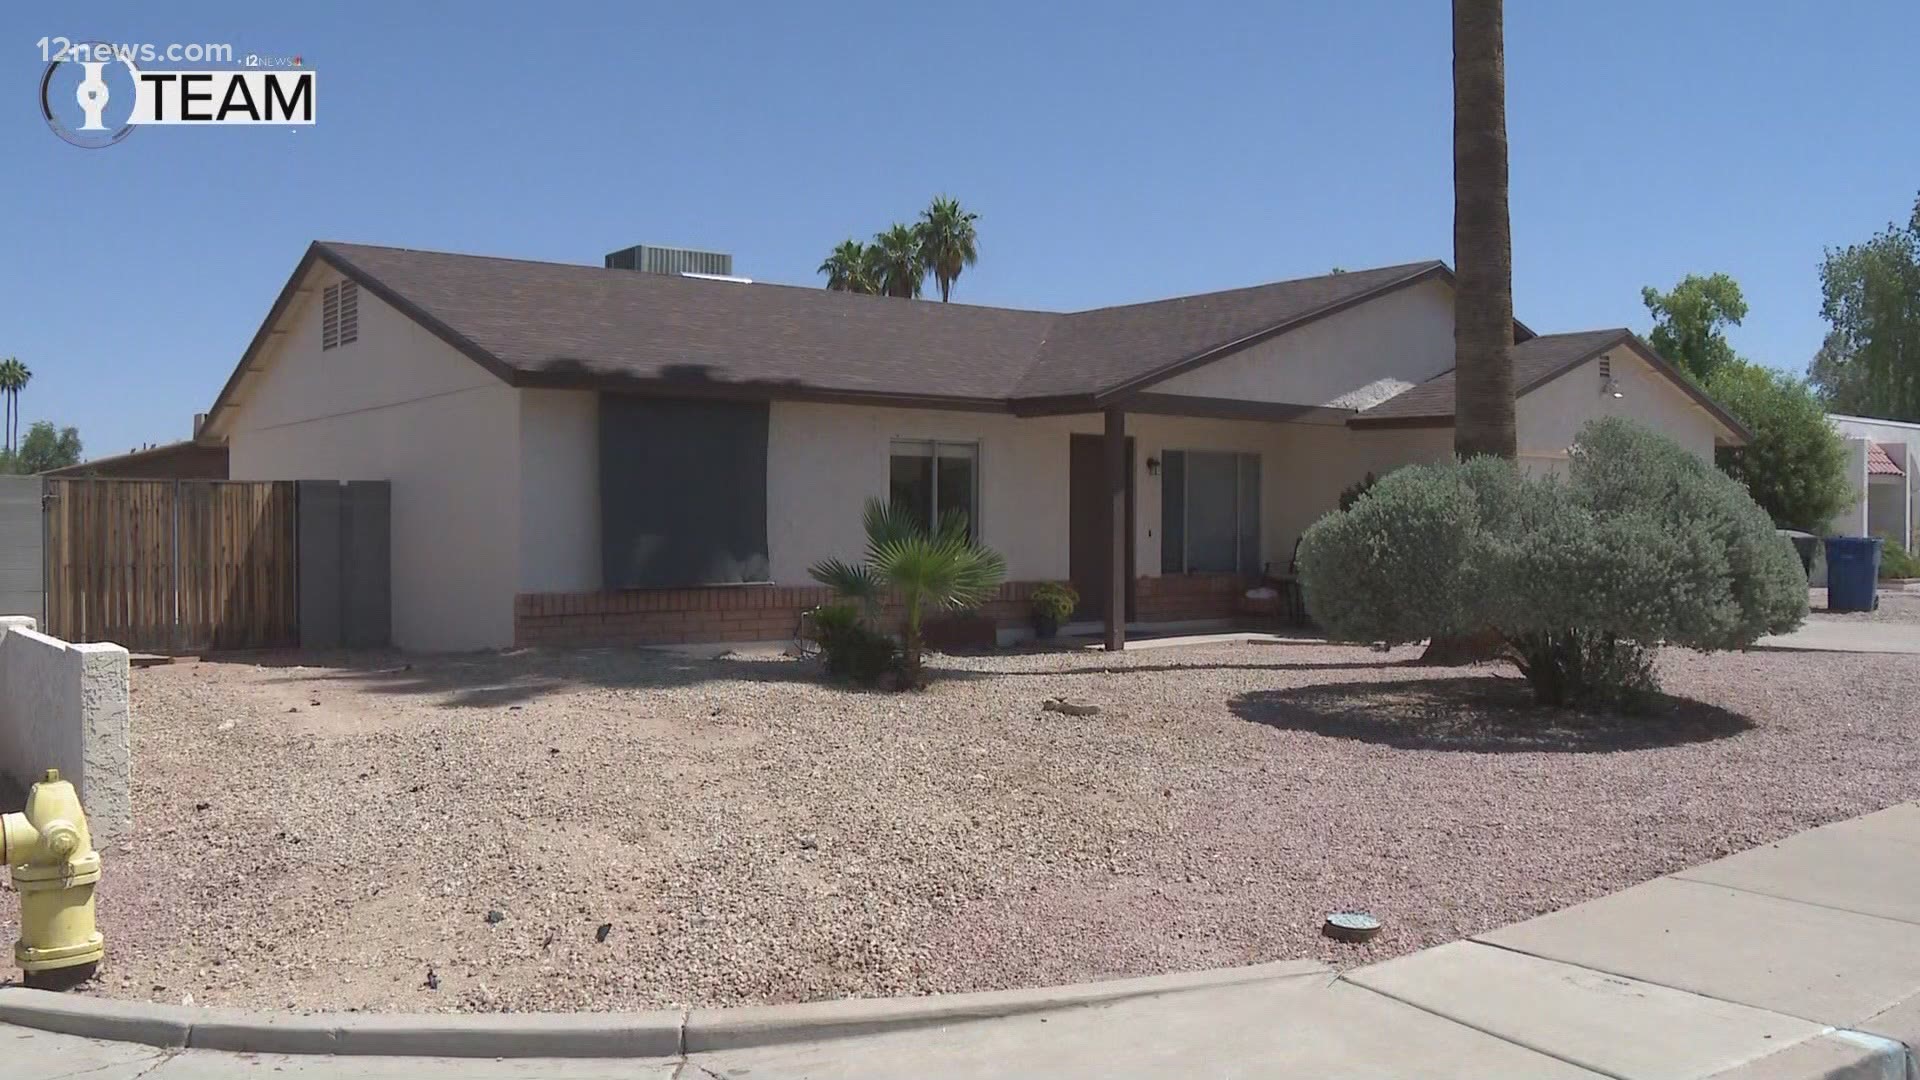 Police are investigating a Mesa group home after a resident was taken to the hospital with a broken jaw. Employees said the resident hurt himself, doctors disagree.